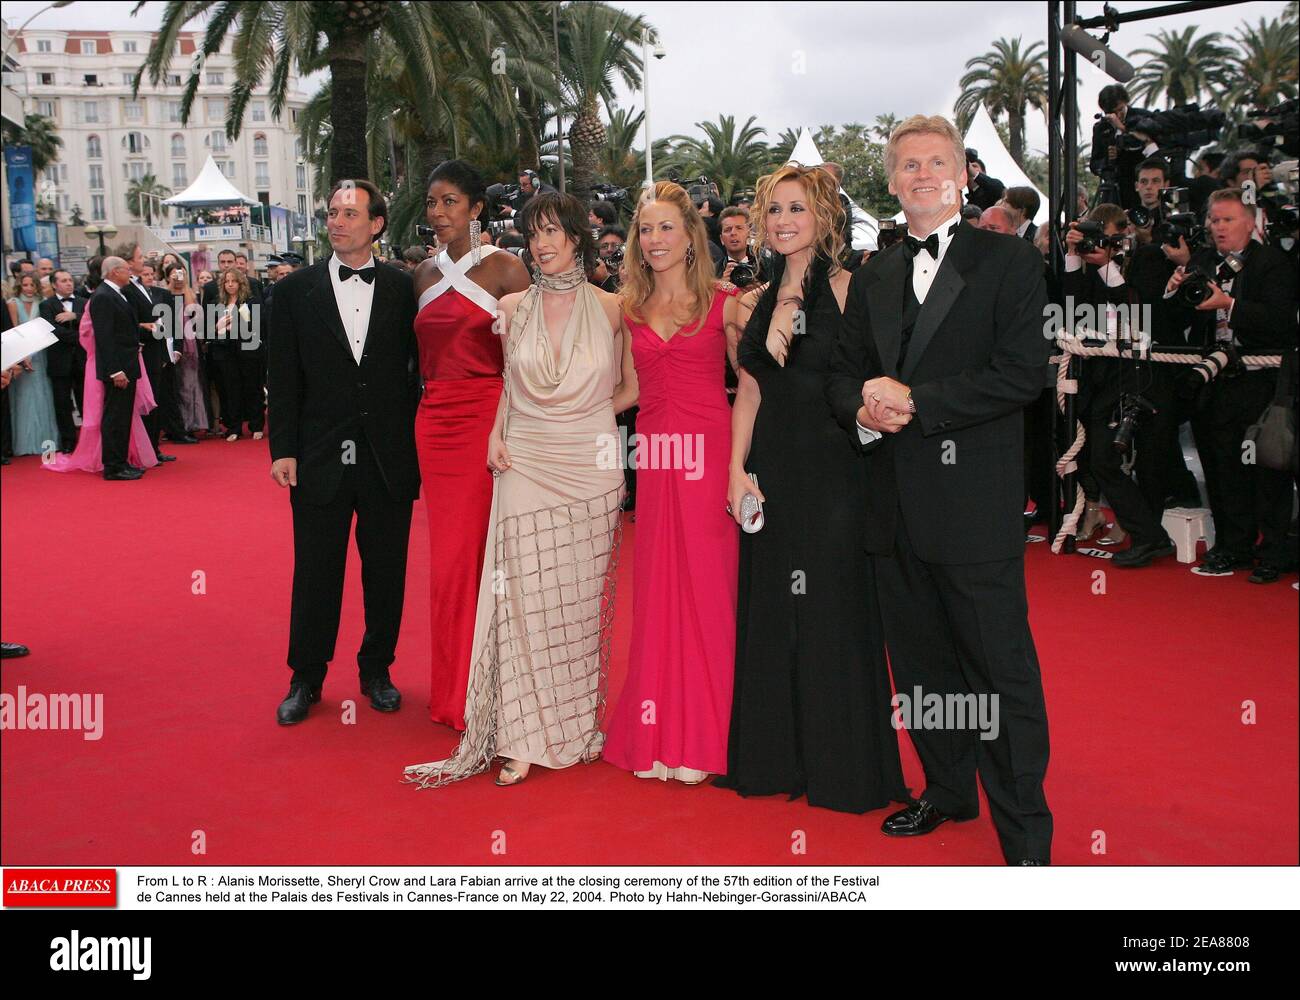 From L to R : Alanis Morissette, Sheryl Crow and Lara Fabian arrive at the closing ceremony of the 57th edition of the Festival de Cannes held at the Palais des Festivals in Cannes-France on May 22, 2004. Photo by Hahn-Nebinger-Gorassini/ABACA Stock Photo